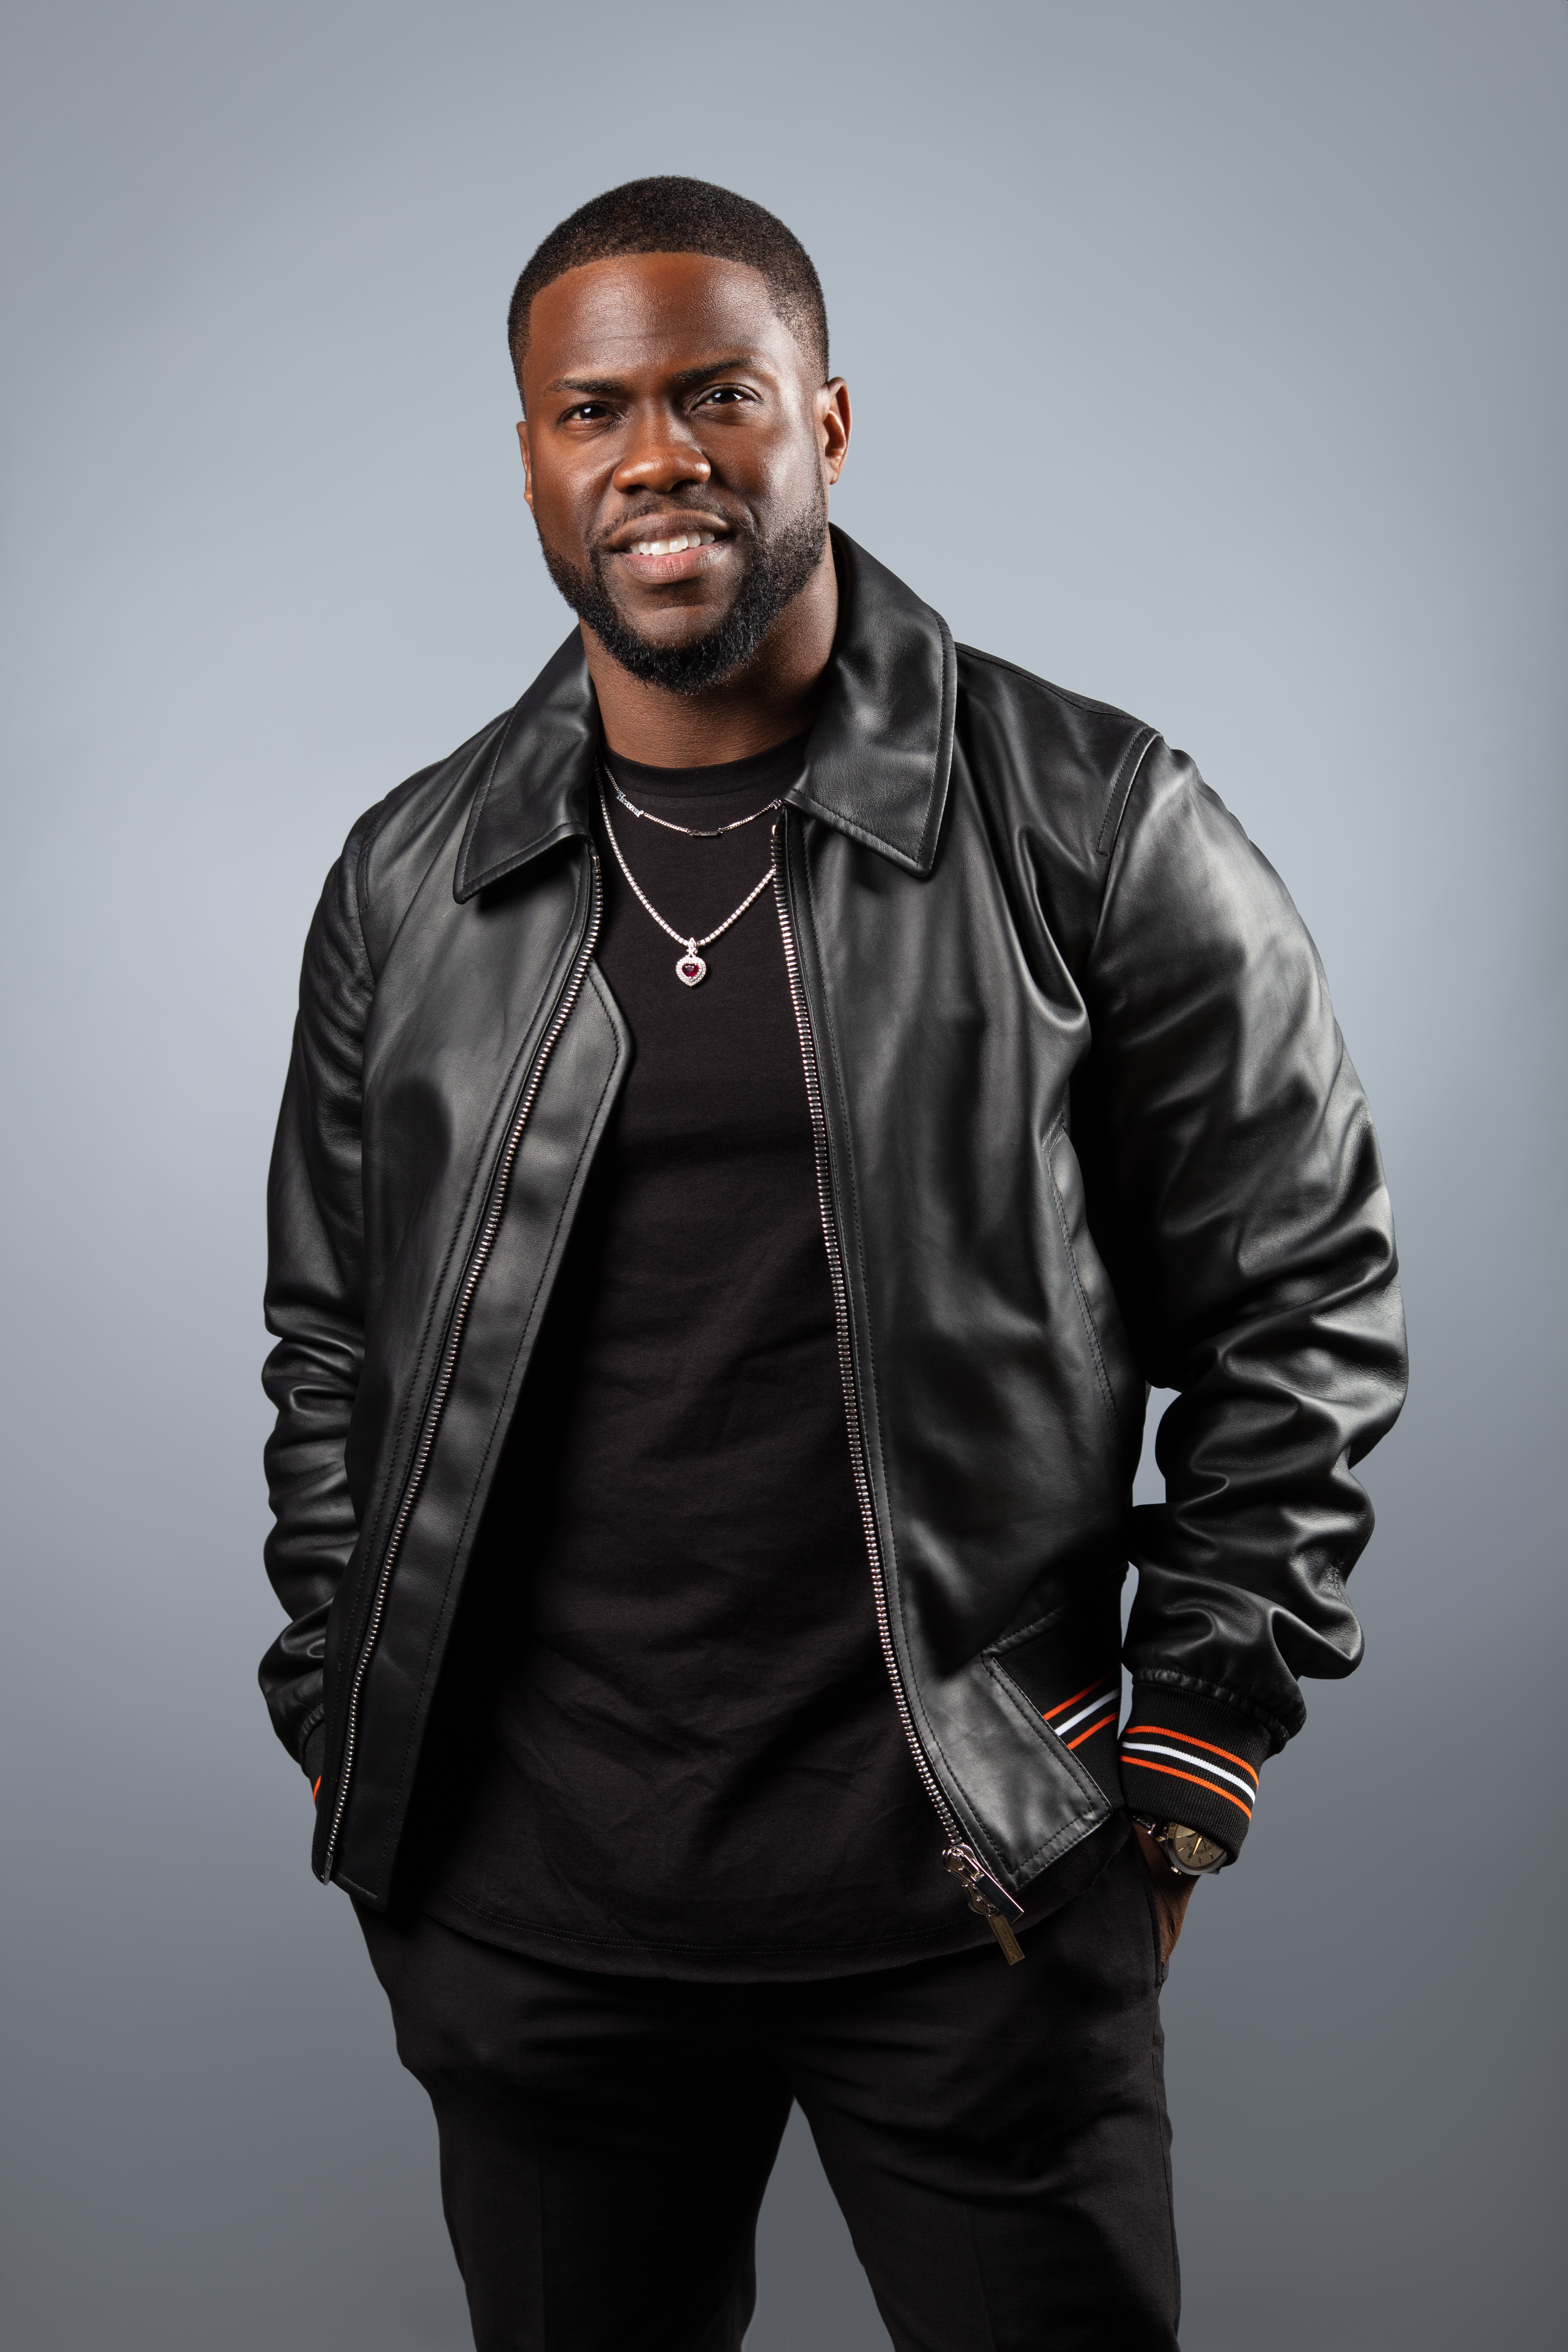 Kevin Hart along with HartBeat Productions ink exclusive partnership with Netflix for feature films and a First-look film production deal